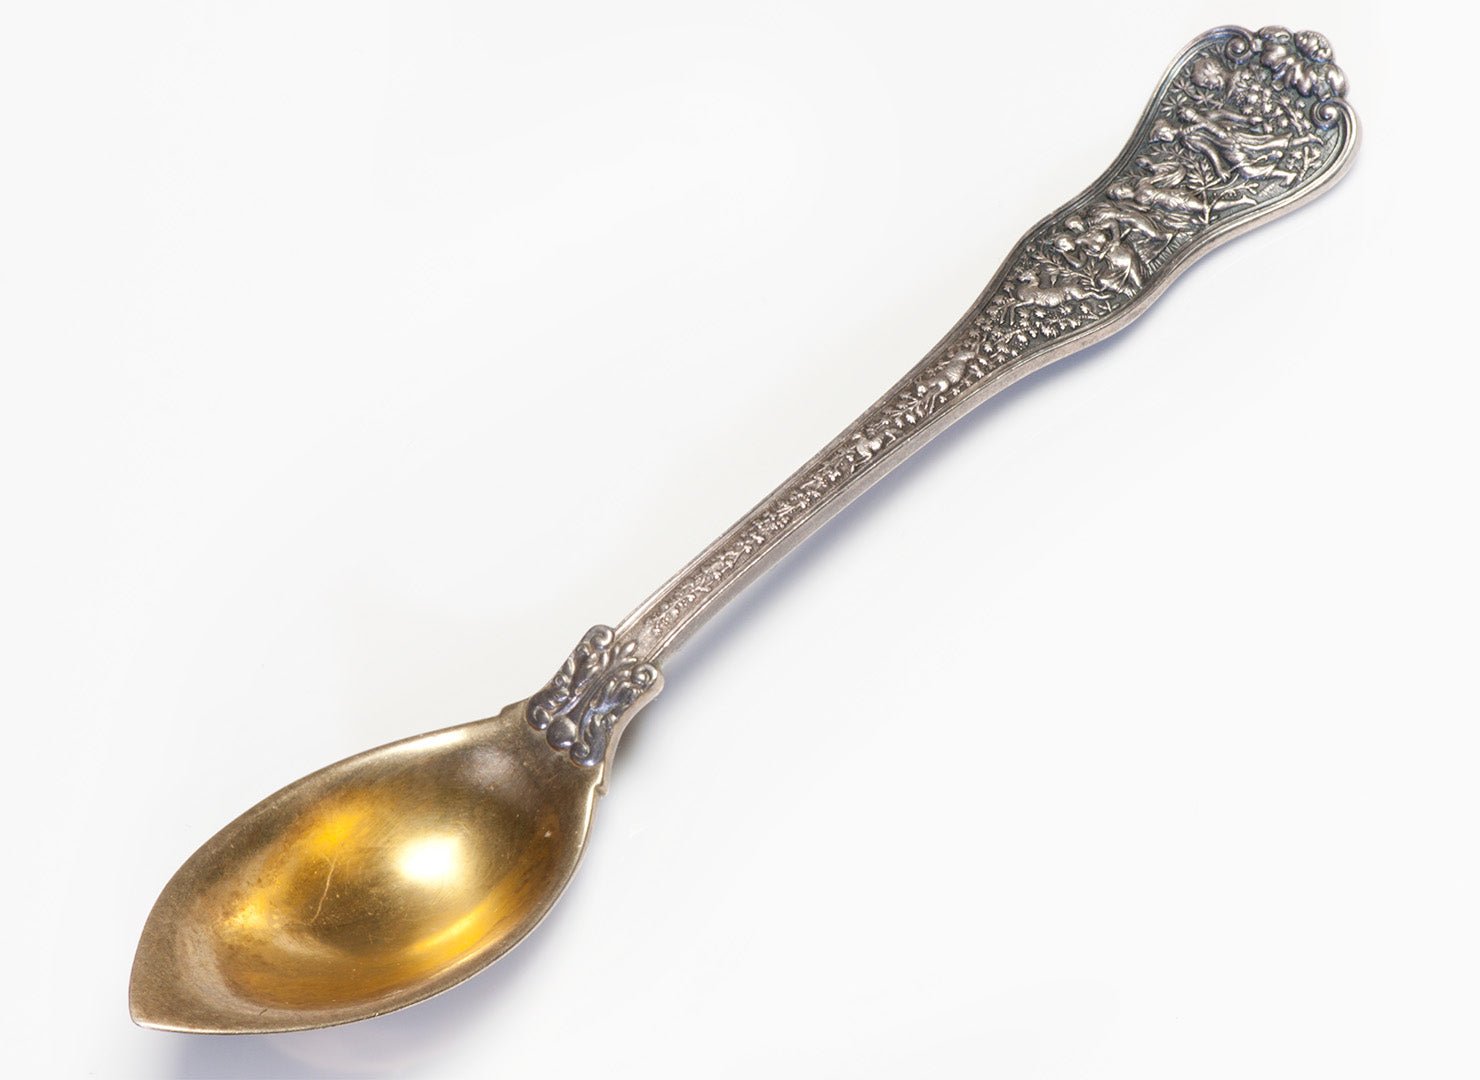 Antique Tiffany & Co. Silver Serving Spoon - DSF Antique Jewelry